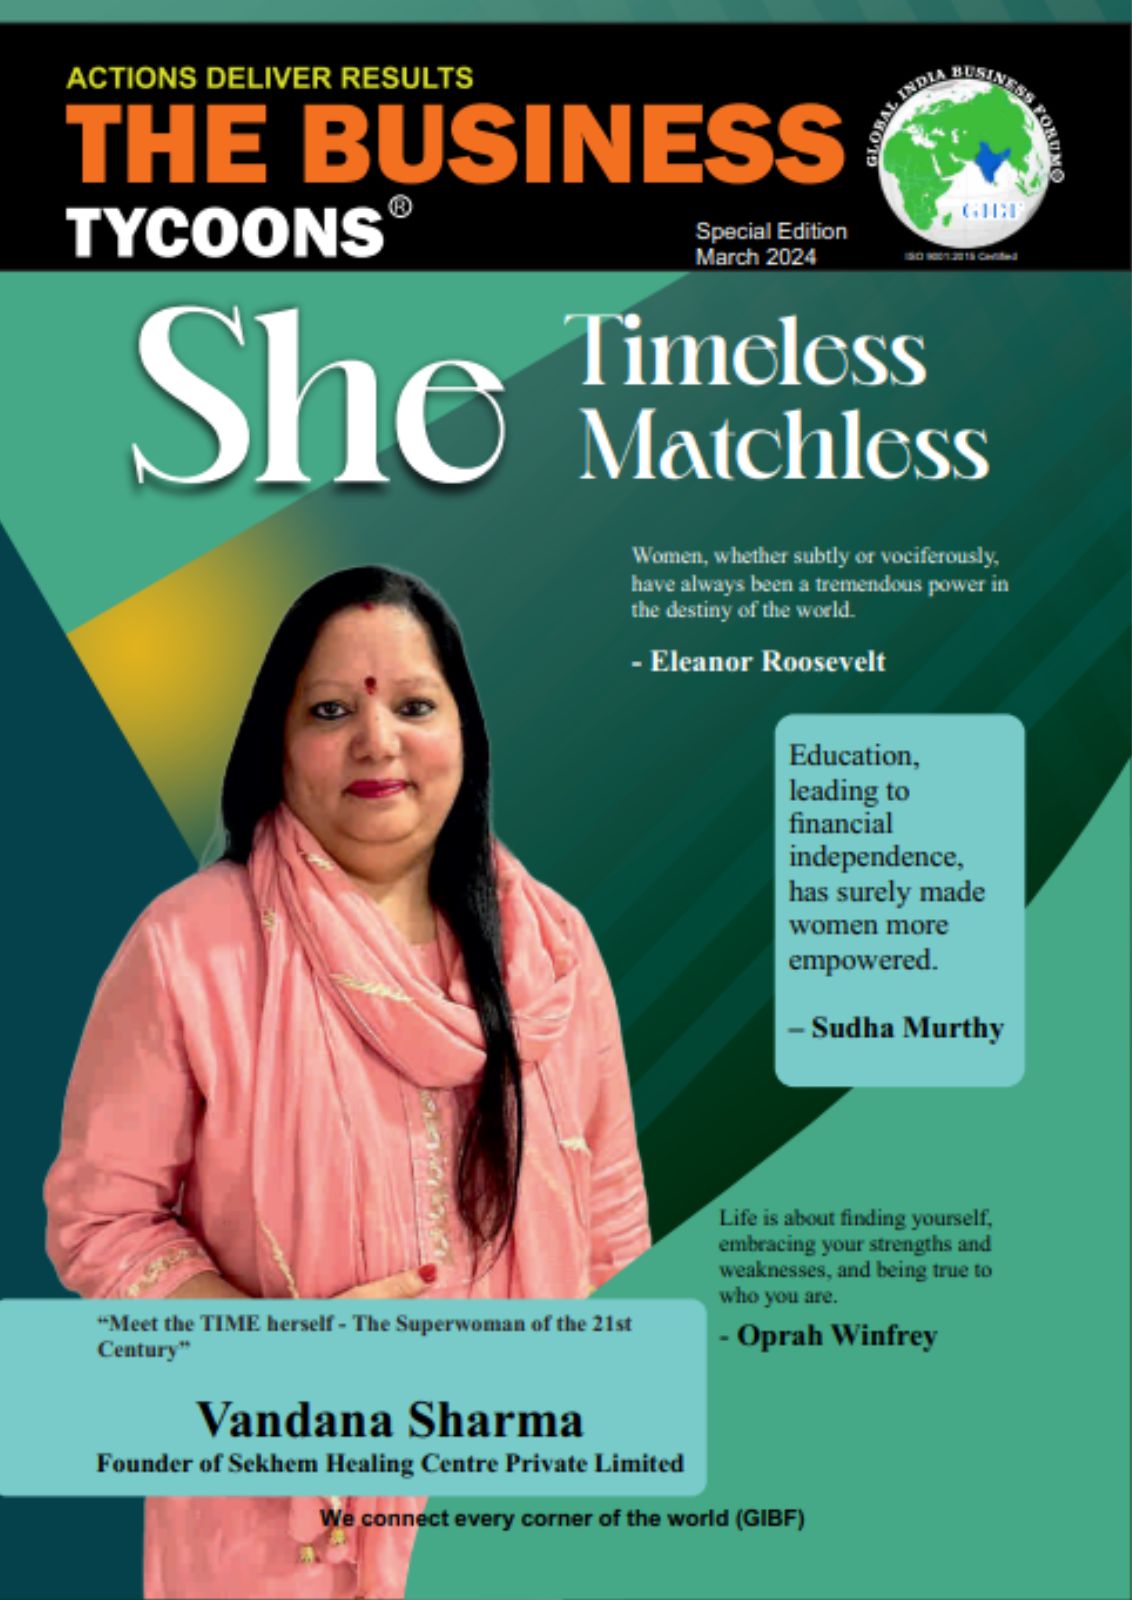 The Business Tycoons - She... Timeless Matchless